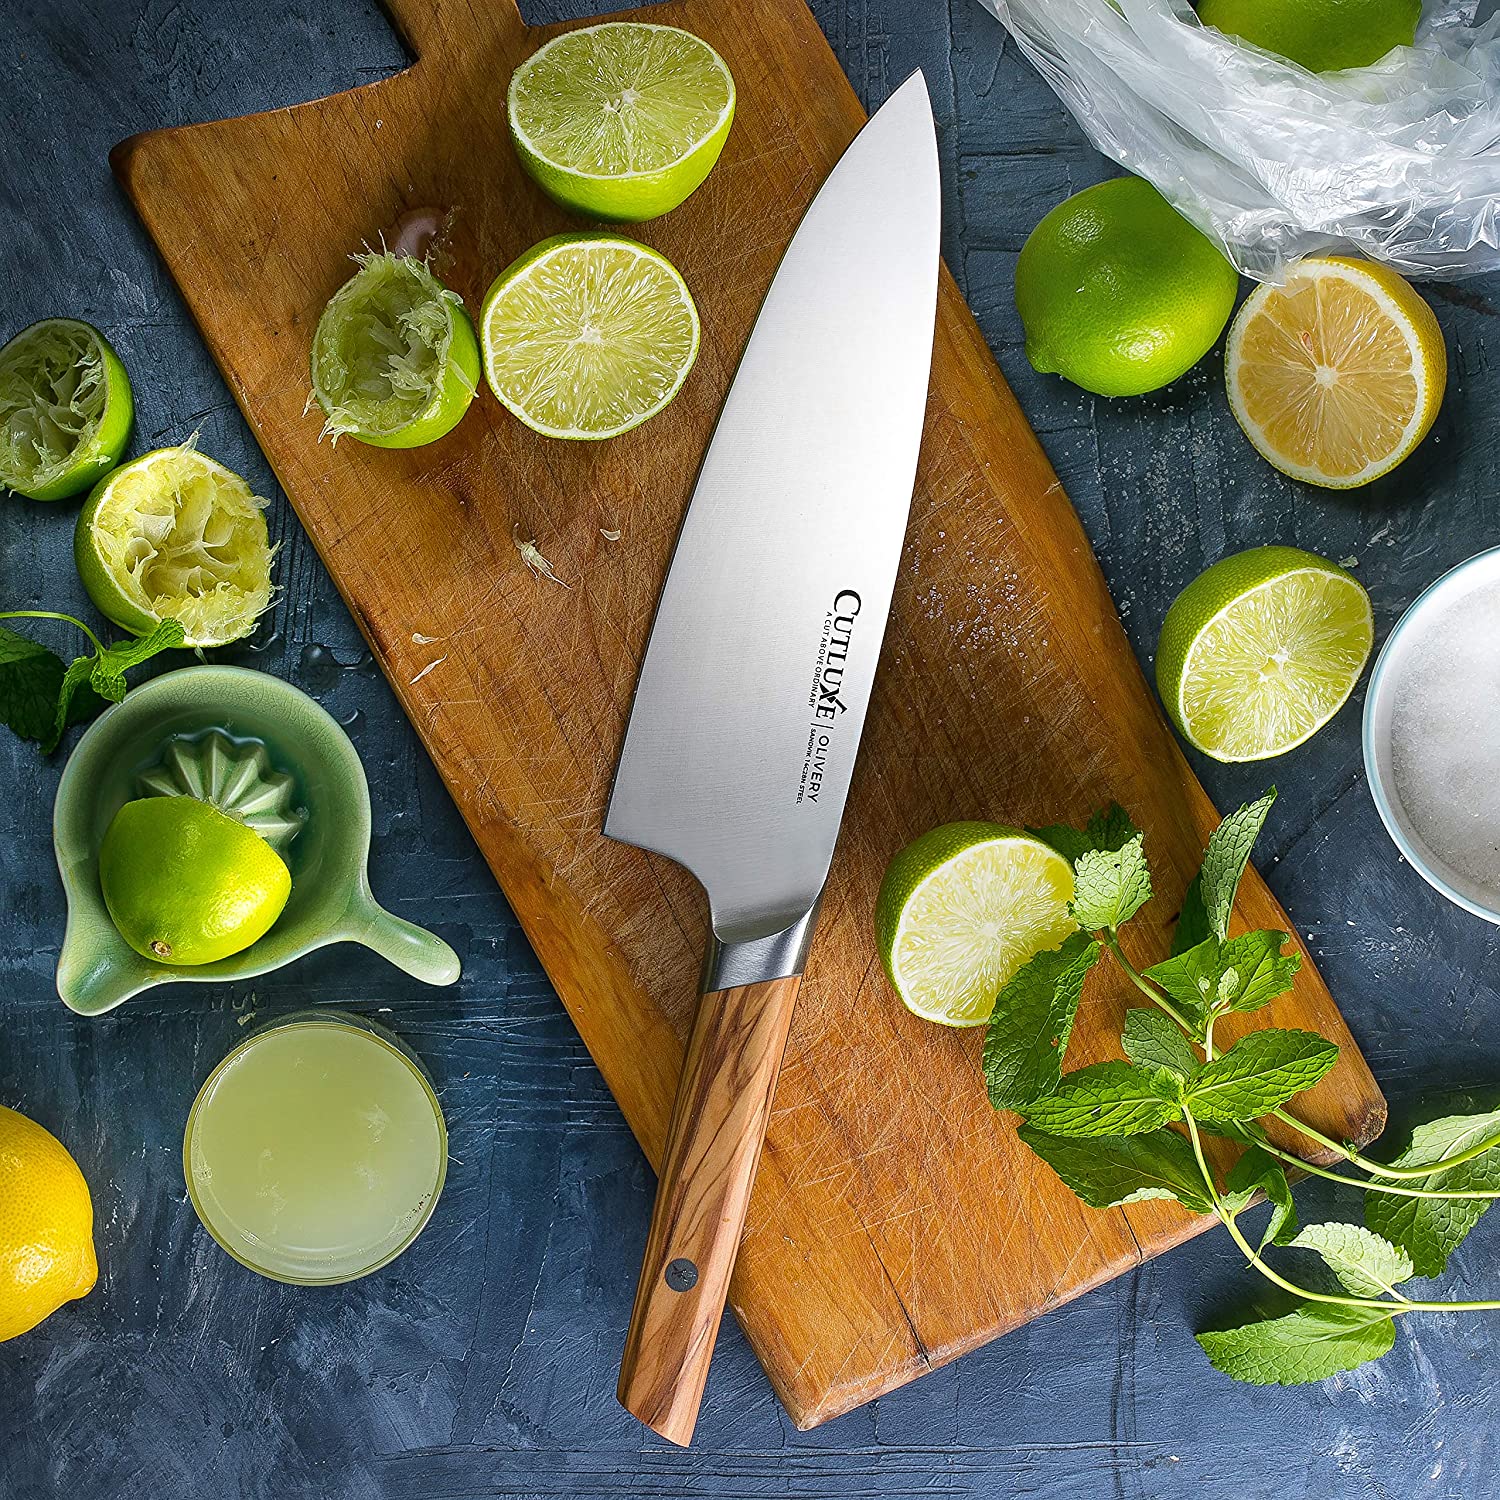 Bloomhouse 8 Inch Chef Knife made with Olive Wood and German Steel -  bloomhousecollection